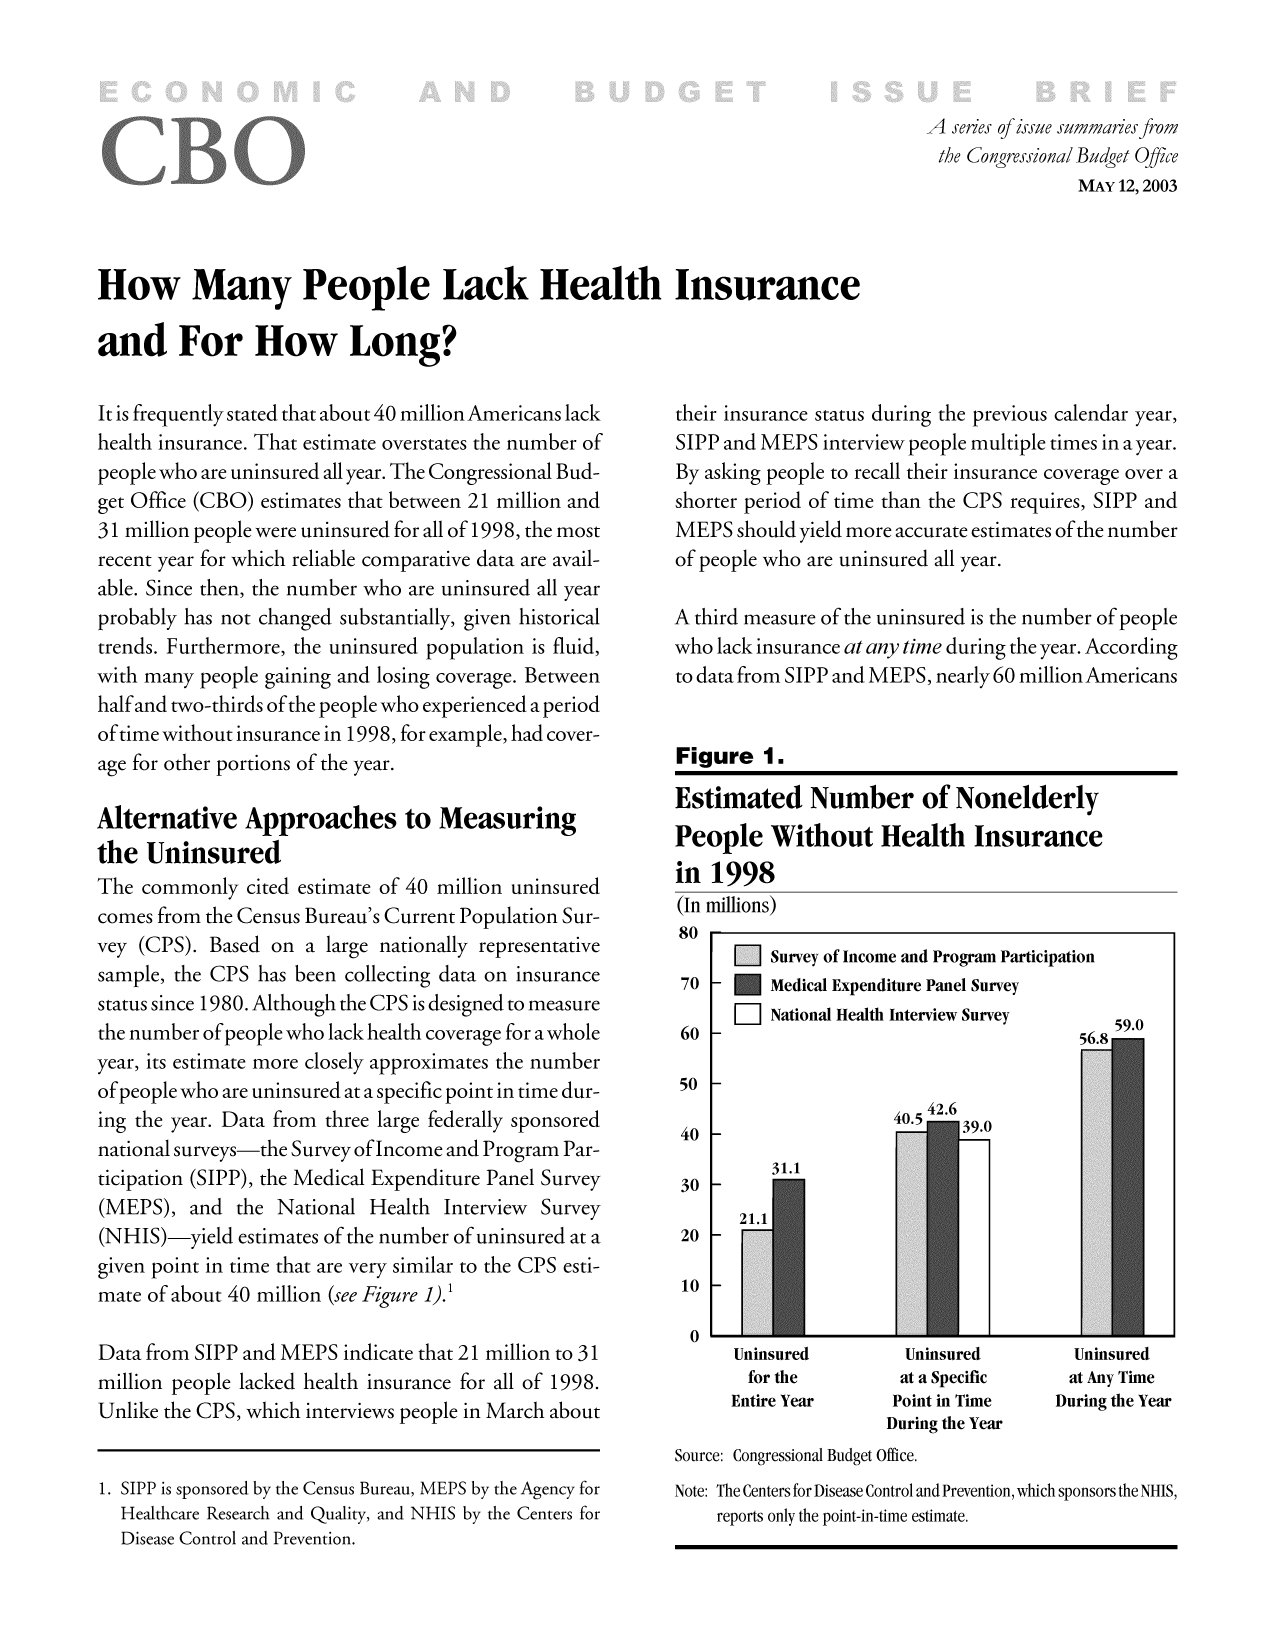 handle is hein.congrec/cbo9255 and id is 1 raw text is: A  series of issue summari.es from
the Congressional Budget Office
MAY 12, 2003

How Many People Lack Health Insurance
and For How Long?

It is frequently stated that about 40 million Americans lack
health insurance. That estimate overstates the number of
people who are uninsured all year. The Congressional Bud-
get Office (CBO) estimates that between 21 million and
31 million people were uninsured for all of 1998, the most
recent year for which reliable comparative data are avail-
able. Since then, the number who are uninsured all year
probably has not changed substantially, given historical
trends. Furthermore, the uninsured population is fluid,
with many people gaining and losing coverage. Between
half and two-thirds of the people who experienced a period
of time without insurance in 1998, for example, had cover-
age for other portions of the year.
Alternative Approaches to Measuring
the Uninsured
The commonly cited estimate of 40 million uninsured
comes from the Census Bureau's Current Population Sur-
vey (CPS). Based on a large nationally representative
sample, the CPS has been collecting data on insurance
status since 1980. Although the CPS is designed to measure
the number of people who lack health coverage for a whole
year, its estimate more closely approximates the number
ofpeople who are uninsured at a specific point in time dur-
ing the year. Data from three large federally sponsored
national surveys-the Survey of Income and Program Par-
ticipation (SIPP), the Medical Expenditure Panel Survey
(MEPS), and the National Health Interview Survey
(NHIS)-yield estimates of the number of uninsured at a
given point in time that are very similar to the CPS esti-
mate of about 40 million (see Figure 1).'
Data from SIPP and MEPS indicate that 21 million to 31
million people lacked health insurance for all of 1998.
Unlike the CPS, which interviews people in March about
1. SIPP is sponsored by the Census Bureau, MEPS by the Agency for
Healthcare Research and Quality, and NHIS by the Centers for
Disease Control and Prevention.

their insurance status during the previous calendar year,
SIPP and MEPS interview people multiple times in a year.
By asking people to recall their insurance coverage over a
shorter period of time than the CPS requires, SIPP and
MEPS should yield more accurate estimates of the number
of people who are uninsured all year.
A third measure of the uninsured is the number of people
who lack insurance at any time during the year. According
to data from SIPP and MEPS, nearly 60 million Americans
Figure 1.
Estimated Number of Nonelderly
People Without Health Insurance
in 1998
(In millions)
80 1

70
60
50
40
30
20
10
0

F-1 Survey of Income and Program Participation
- * Medical Expenditure Panel Survey
F71 National Health Interview Survey        59.0
- a r, a

42.6

39.0

Uninsured            Uninsured
for the           at a Specific
Entire Year        Point in Time
During the Year

Uninsured
at Any Time
During the Year

Source: Congressional Budget Office.
Note: The Centers for Disease Control and Prevention, which sponsors the NHIS,
reports only the point-in-time estimate.


